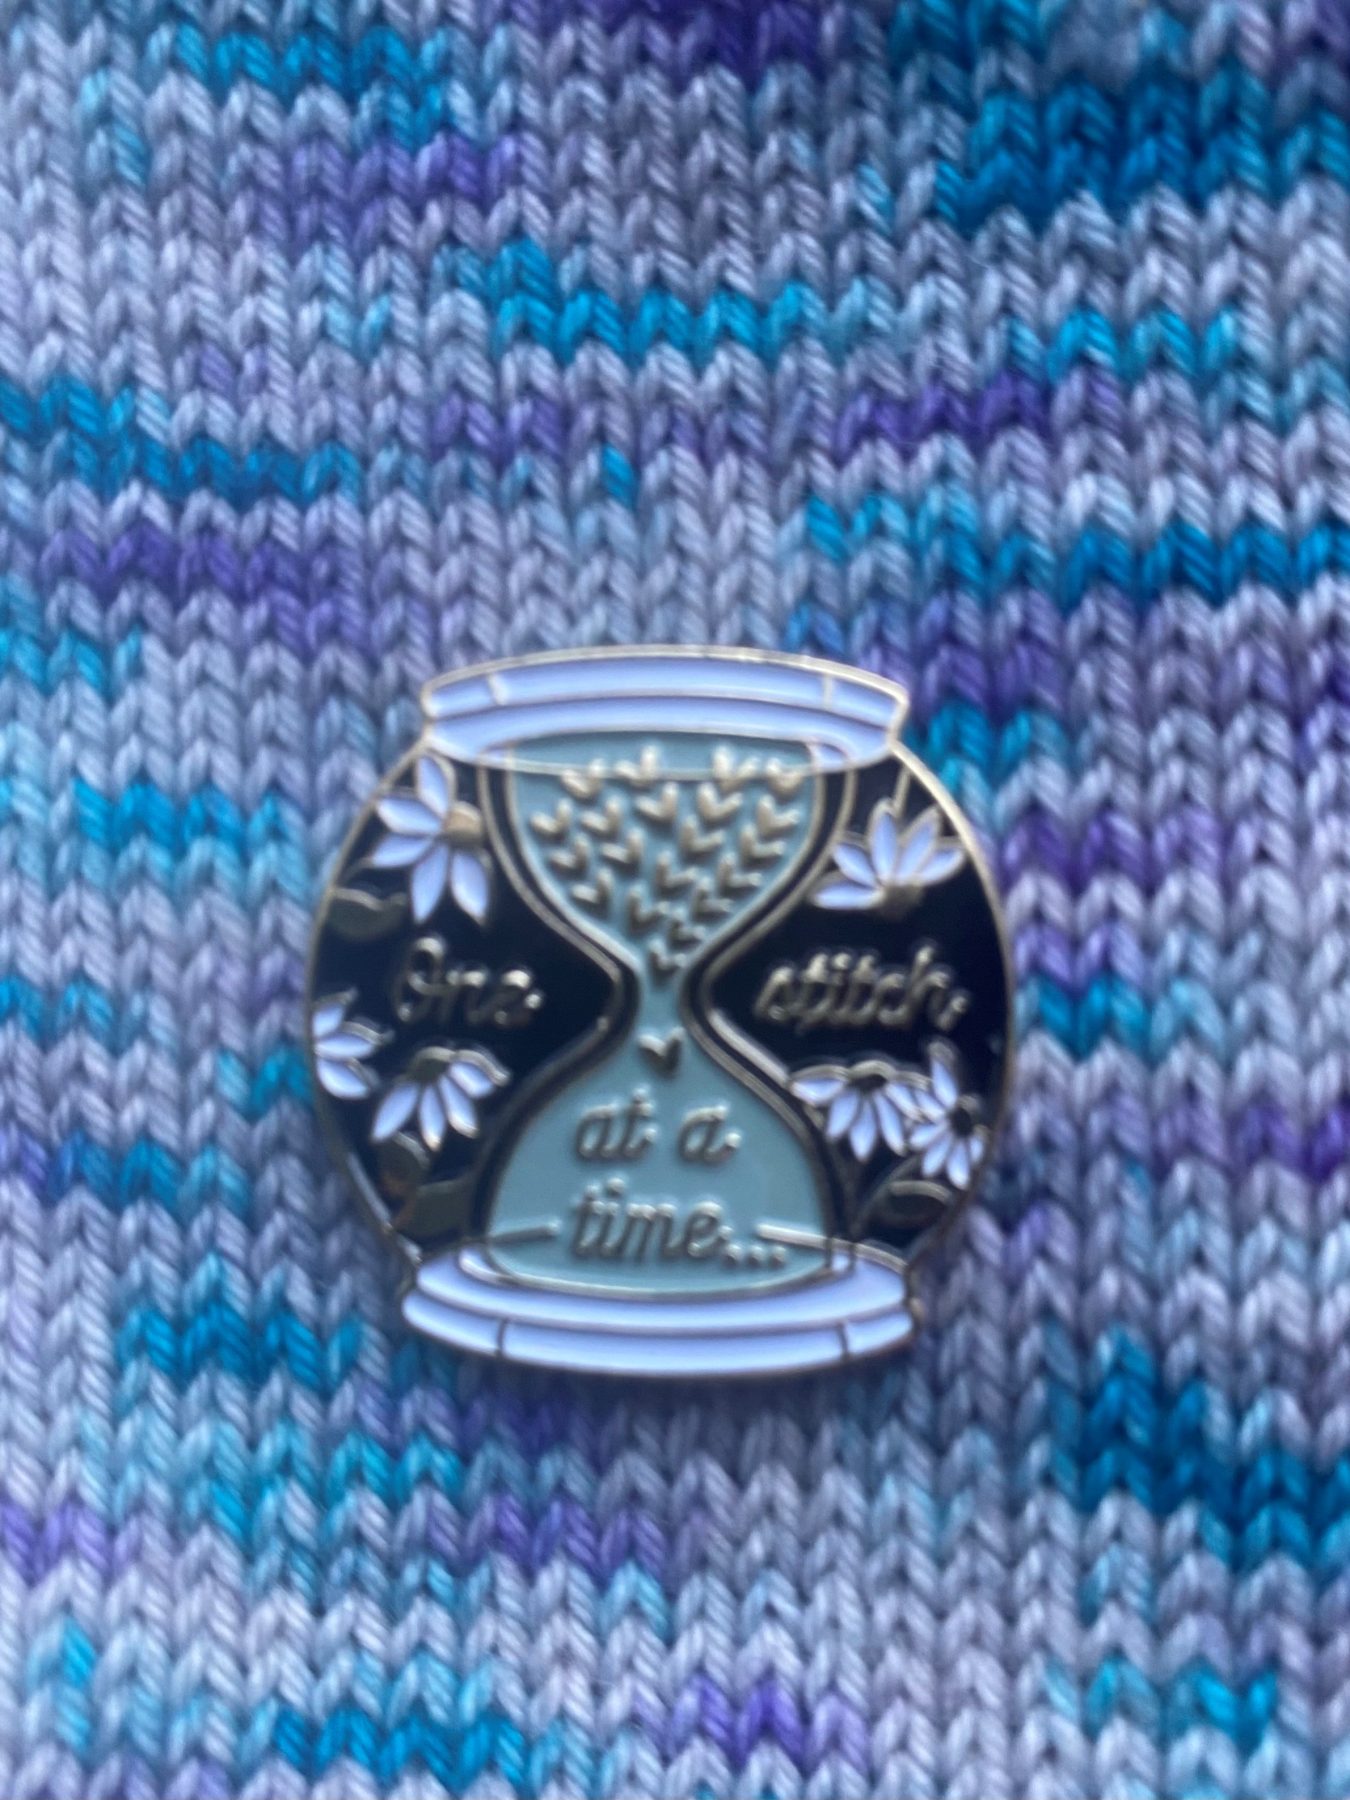 One Stitch at a Time Hourglass Pin Badge